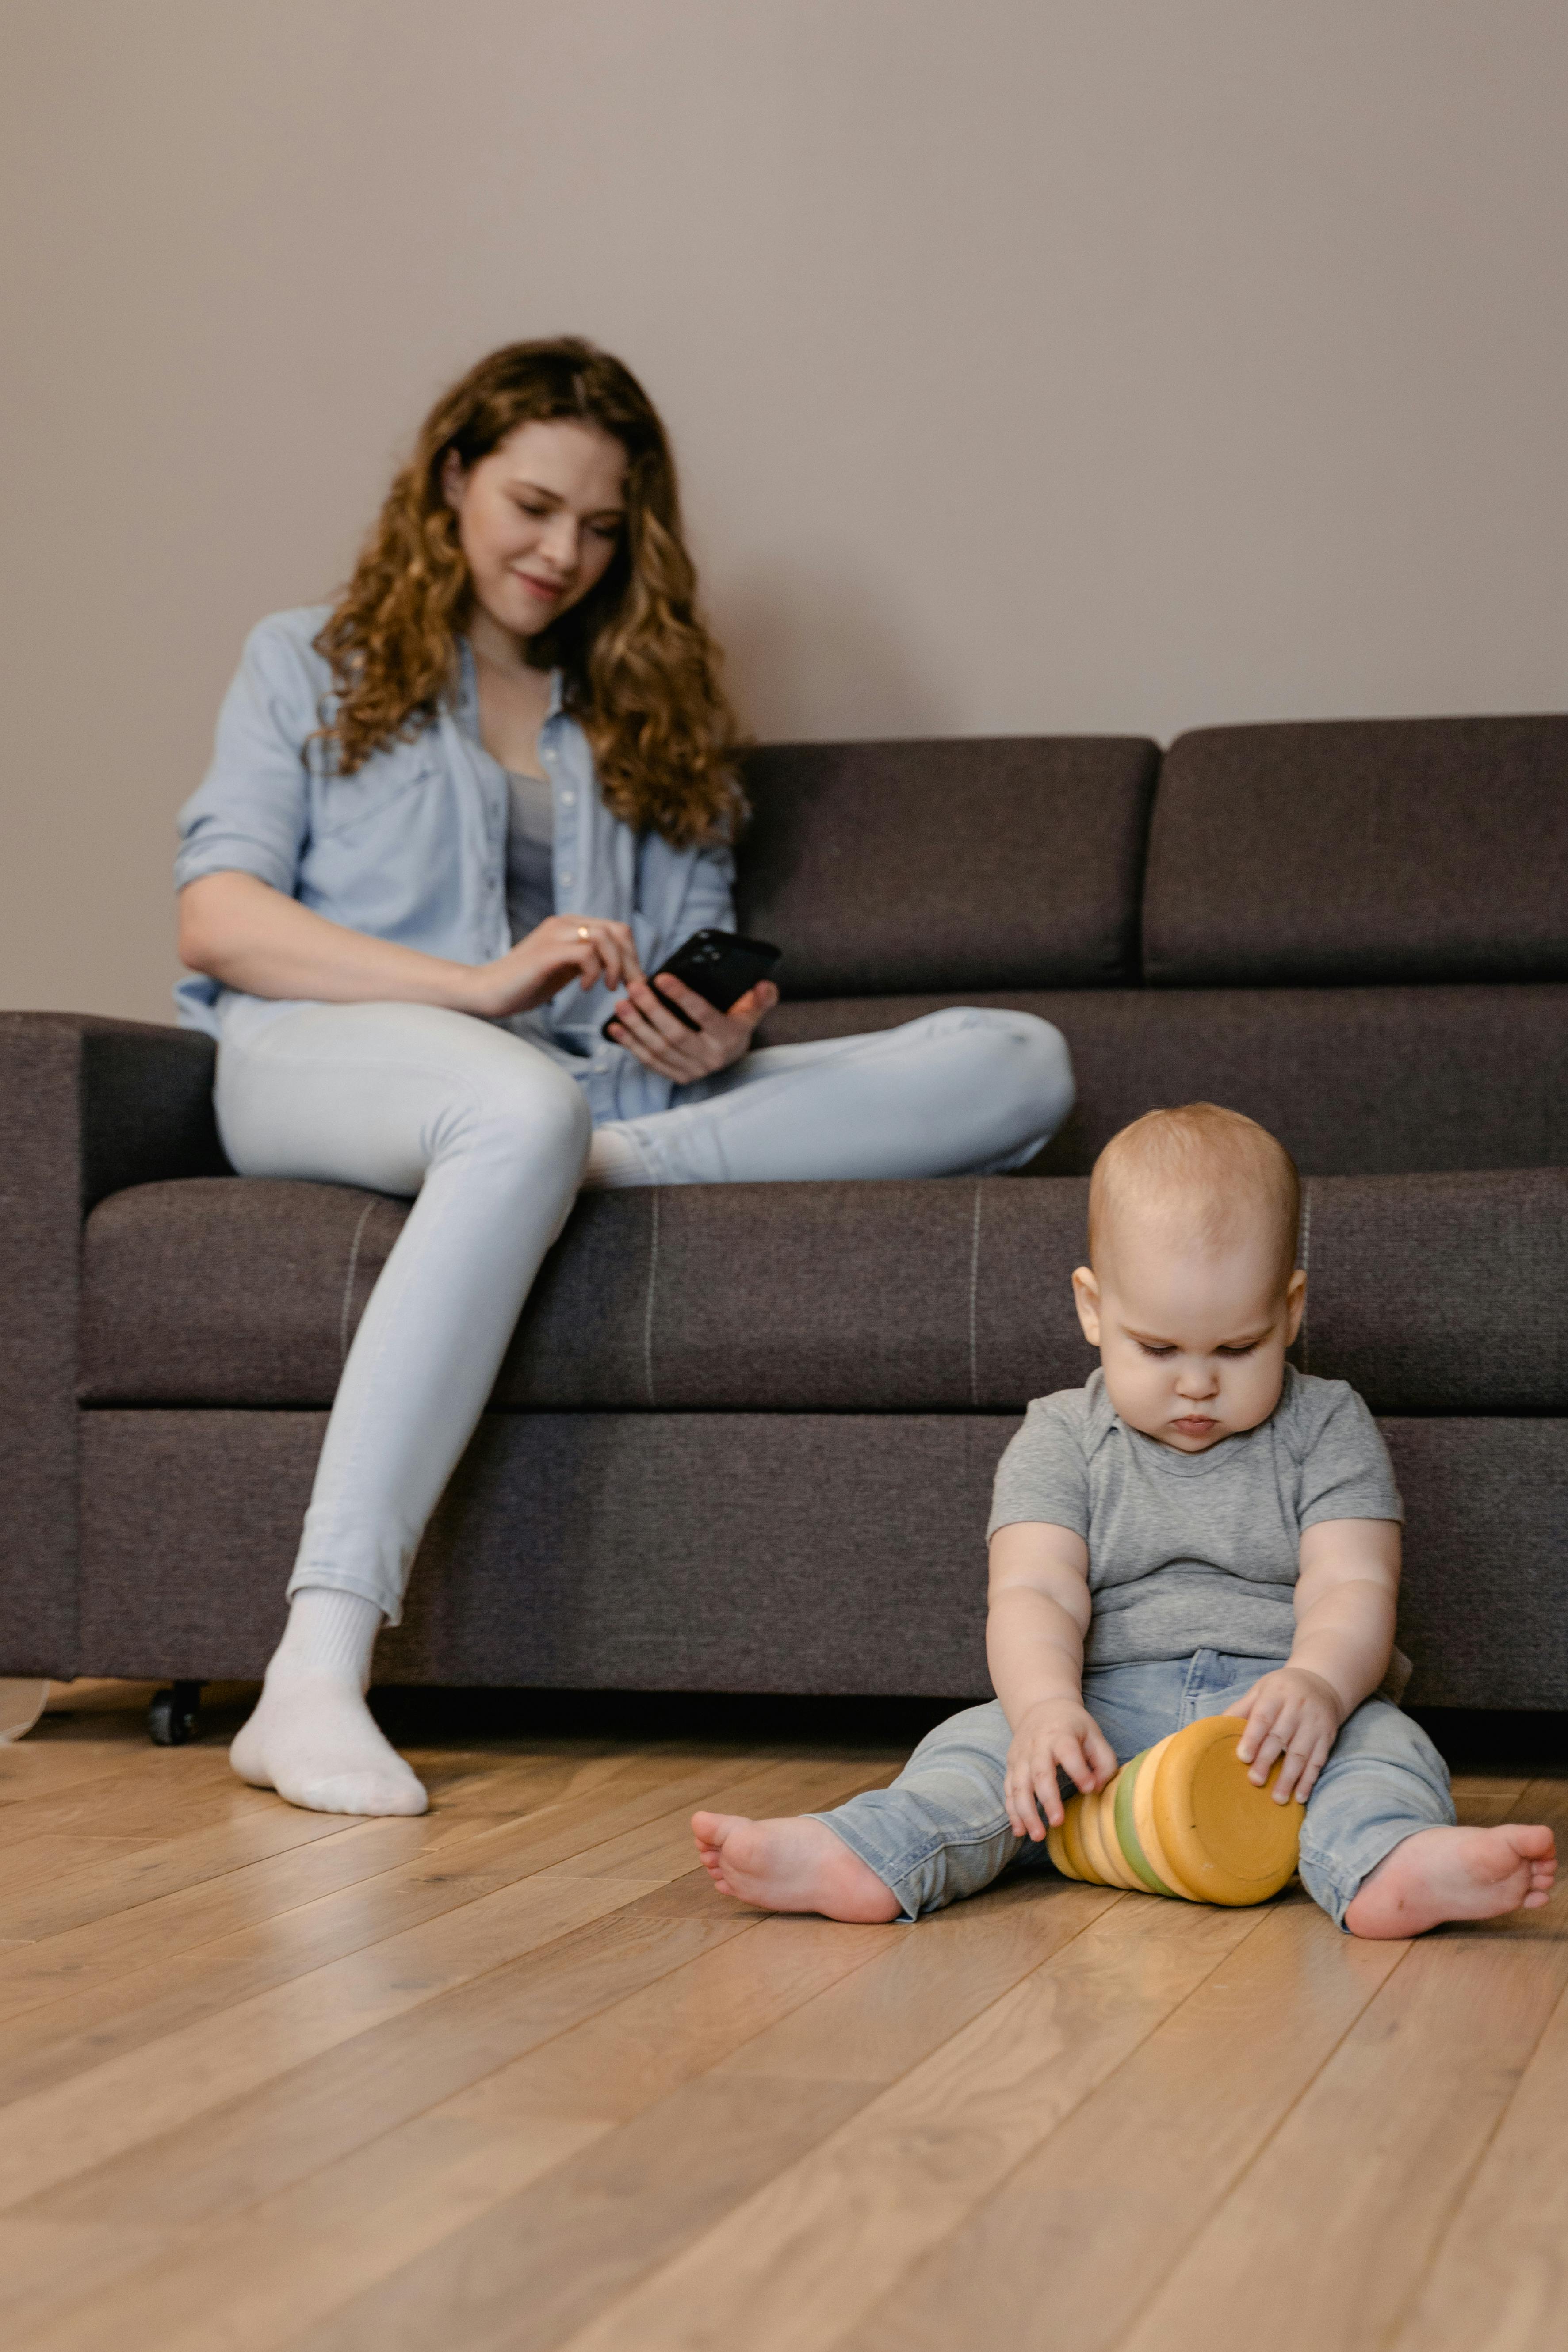 a woman using her mobile phone near her baby sitting on the floor